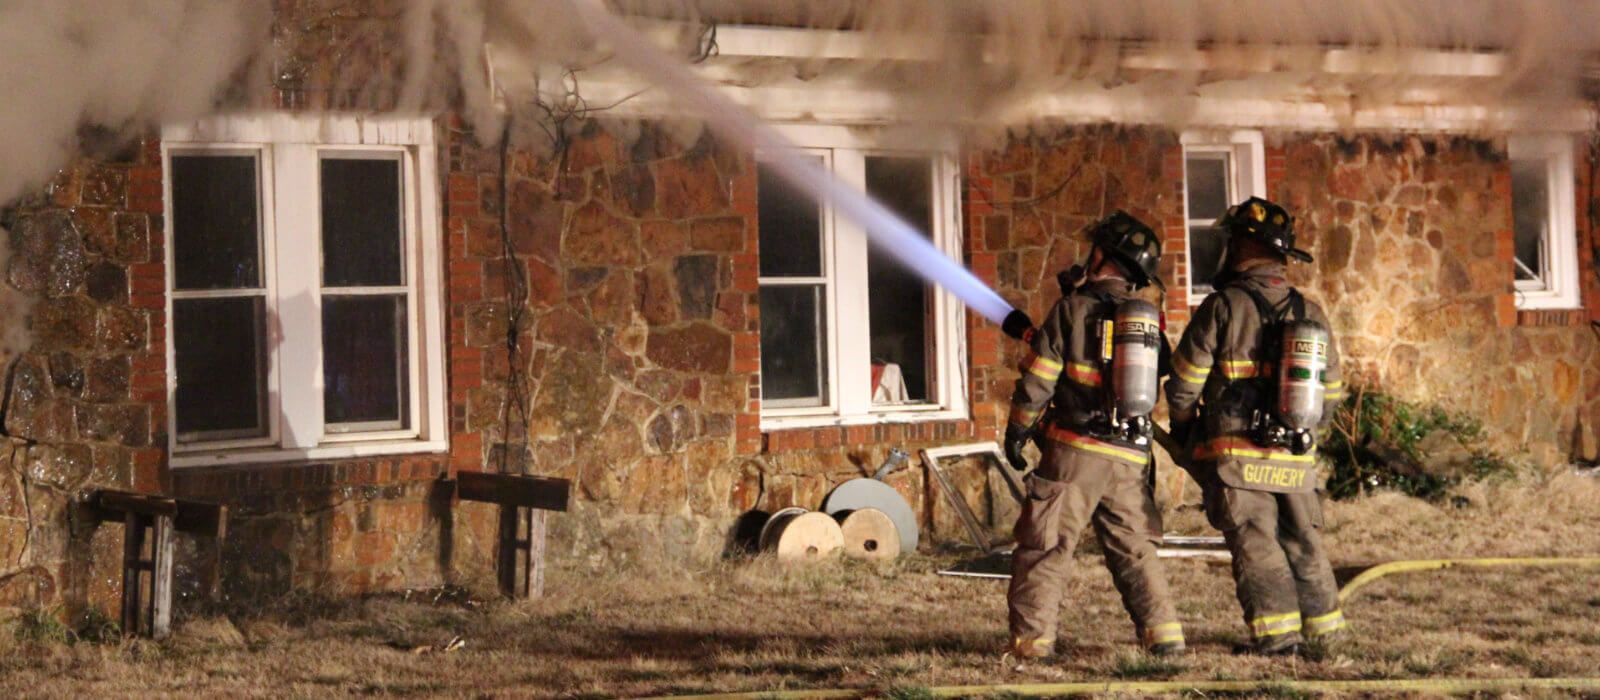 Brownwood Professional Firefighters